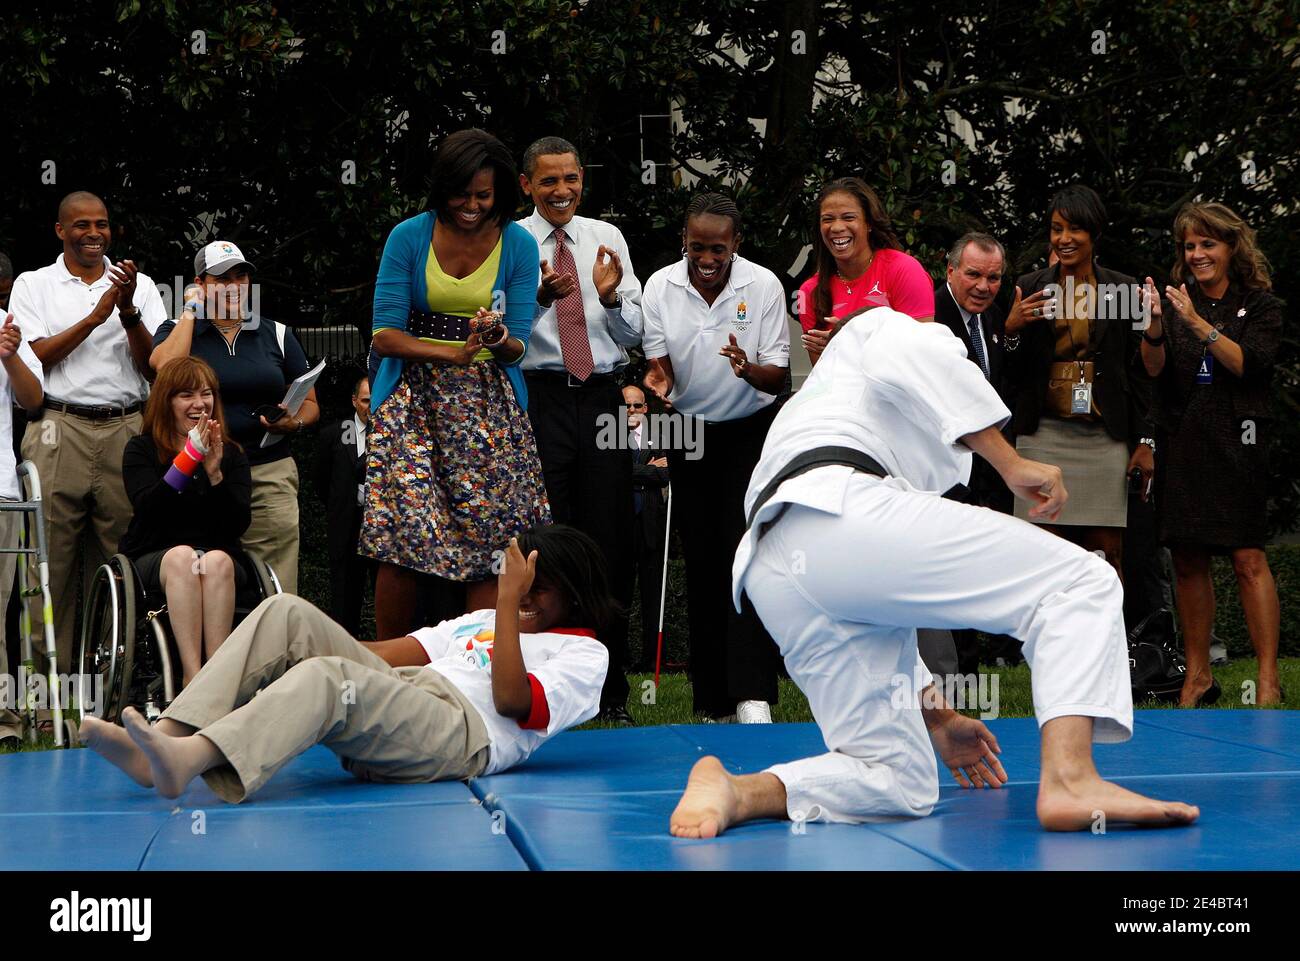 President Barack Obama and his wife Michelle watch a demonstration of judo during an event on Olympics, Paralympics and Youth Sport Canadian on the South Lawn of the White House, Washington, DC,